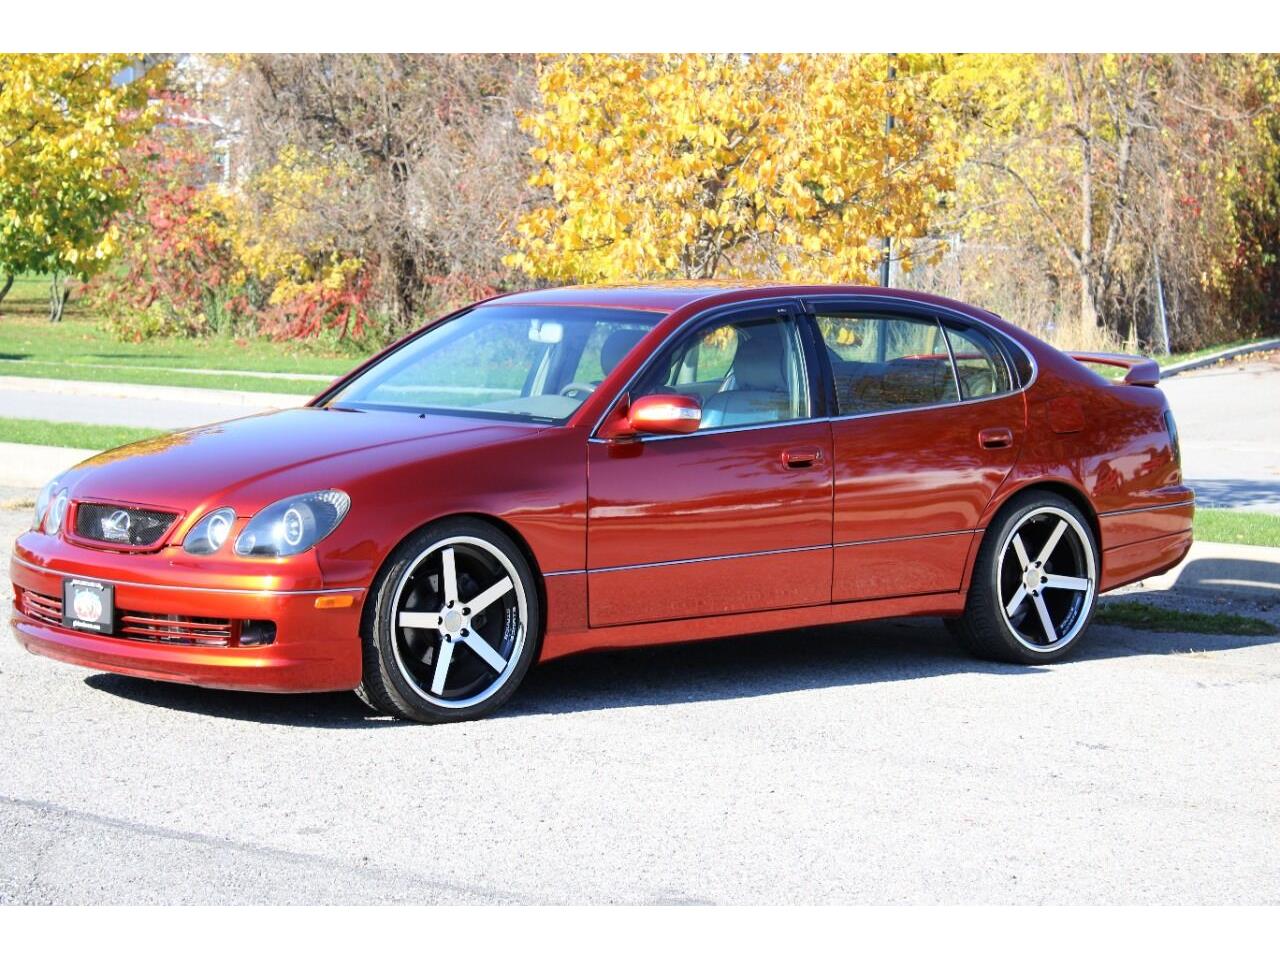 1998 Lexus GS400 for sale in Hilton, NY